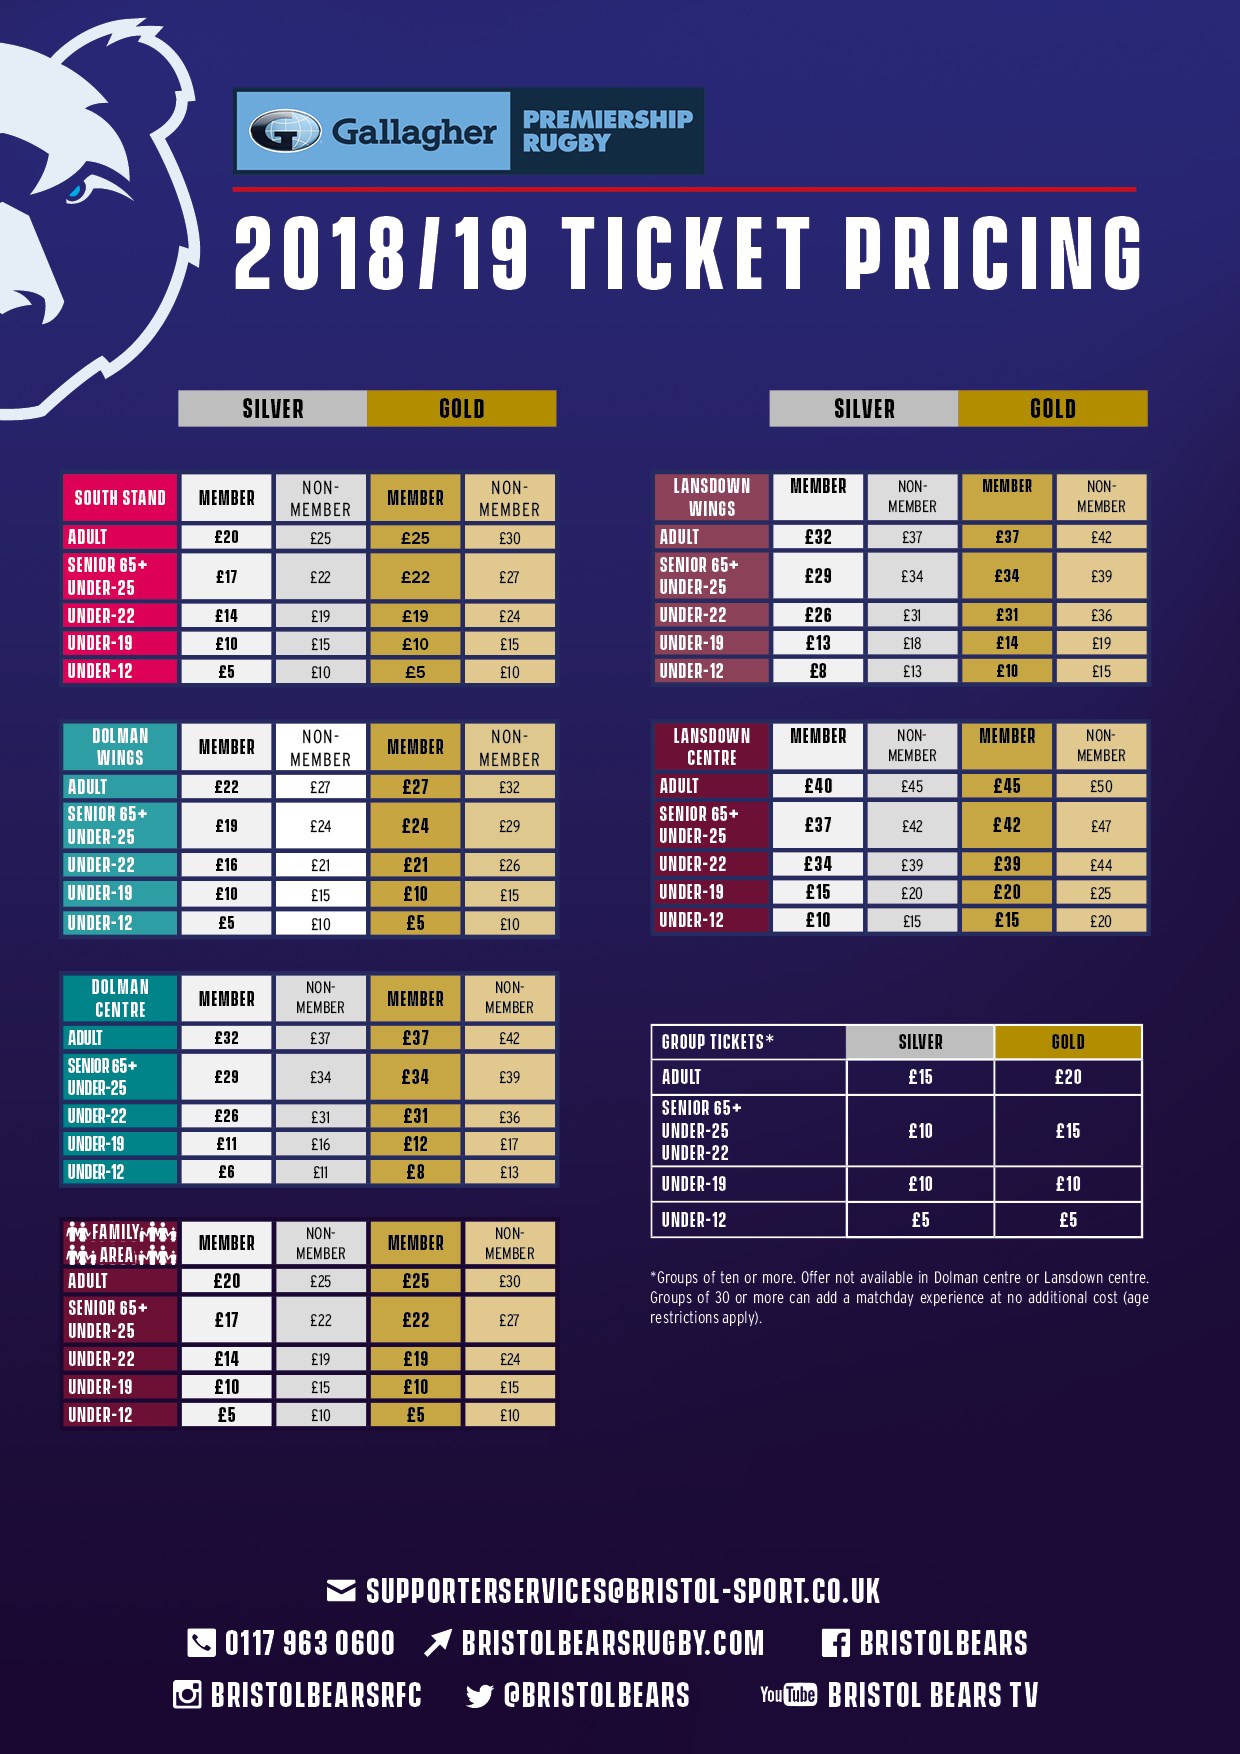 Bristol Bears confirm ticket prices for their Premiership return Ruck